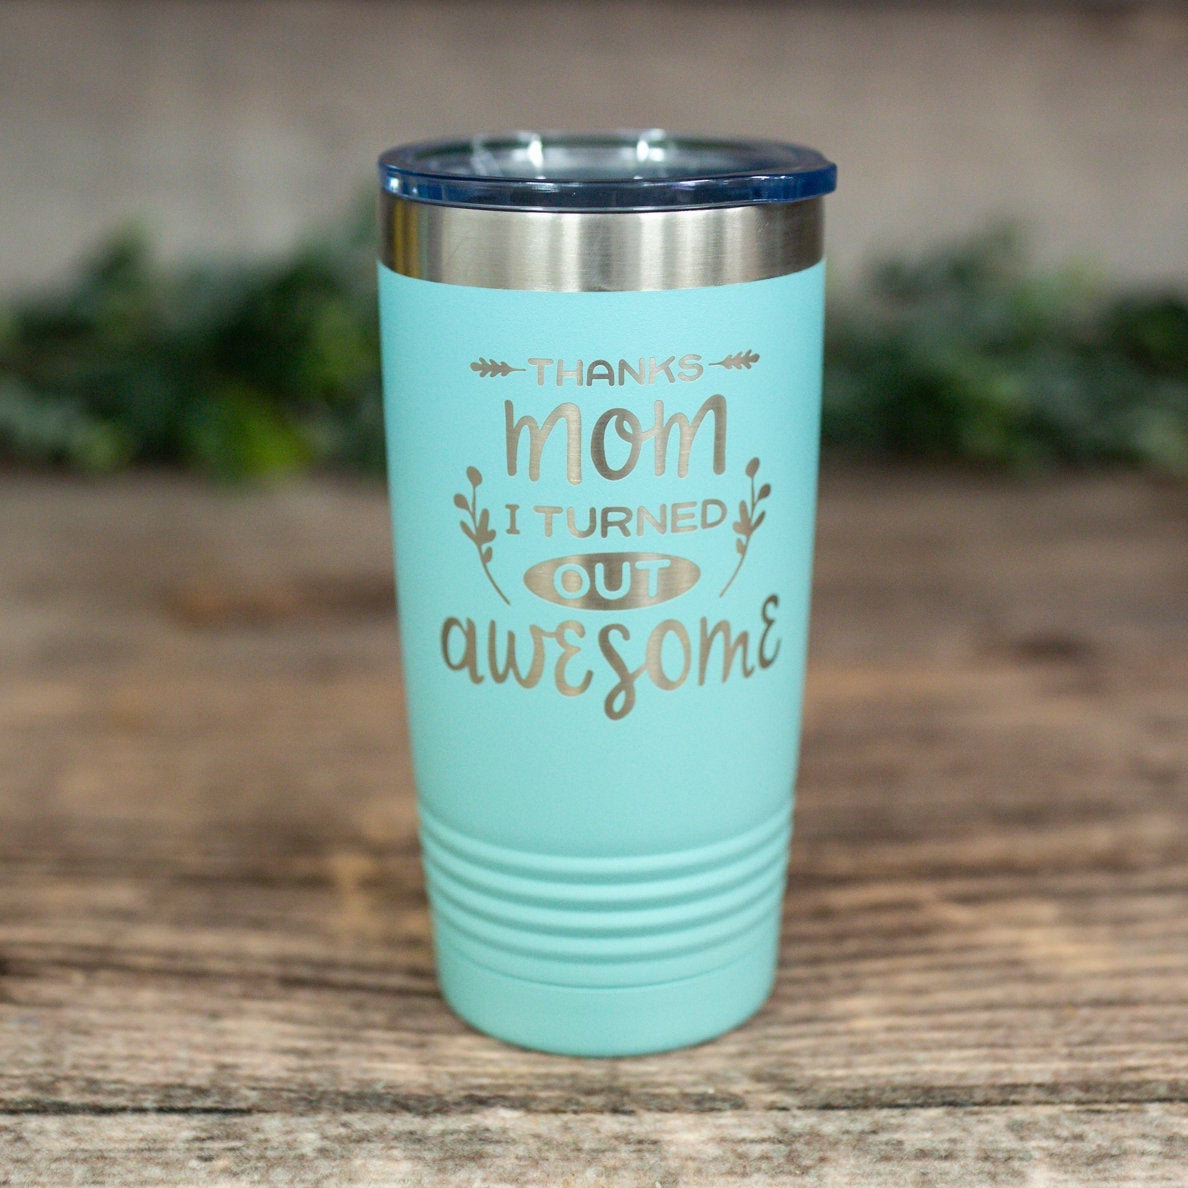 https://3cetching.com/wp-content/uploads/2021/07/thanks-mom-i-turned-out-awesome-engraved-stainless-steel-tumbler-funny-gift-mug-sarcasm-gift-60f75c48.jpg